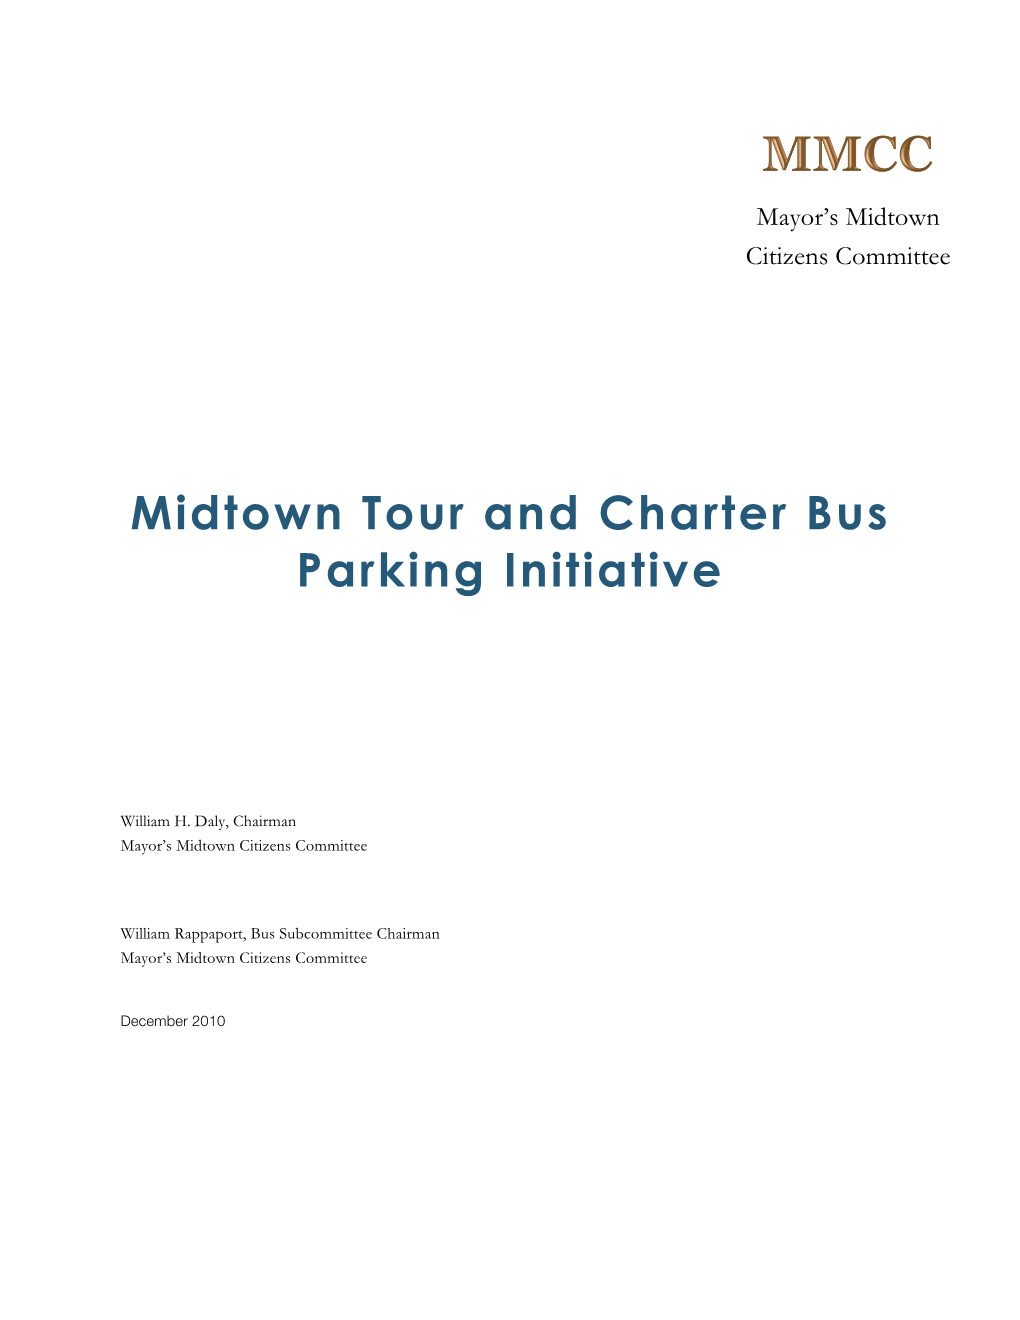 Midtown Tour and Charter Bus Parking Initiative